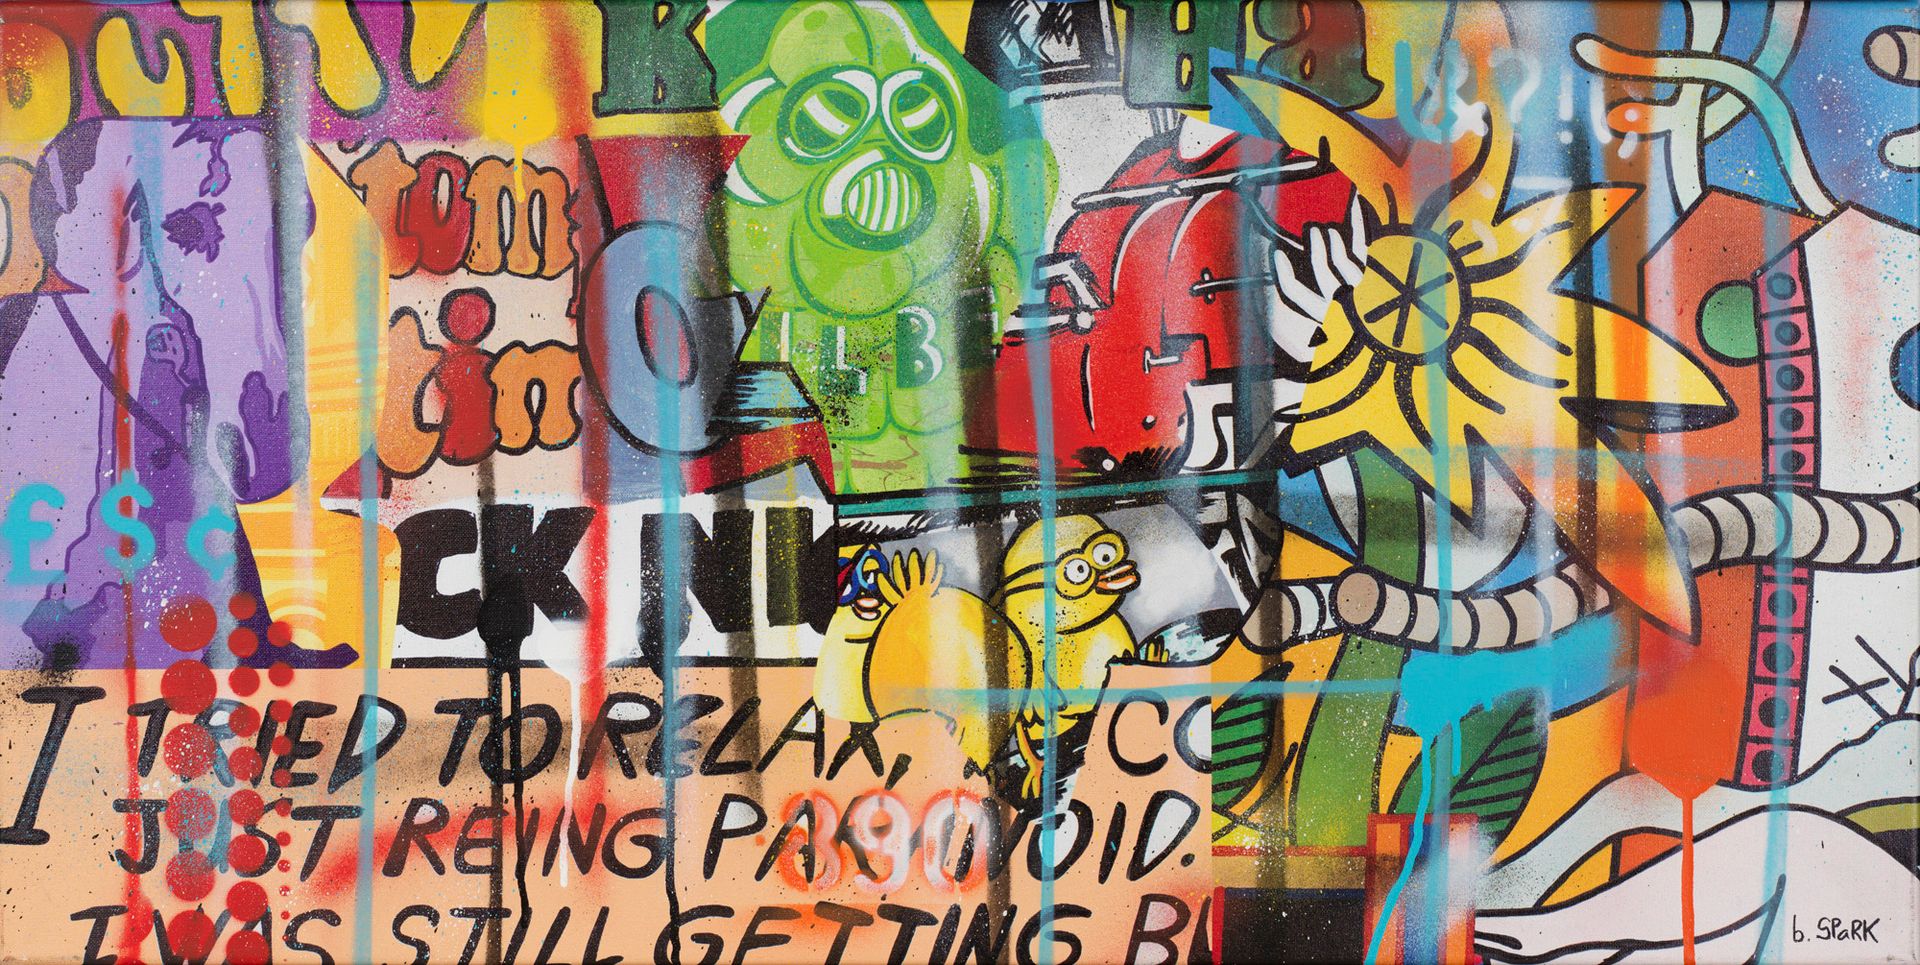 SPARK SPARK - Try to relax - Mixed media on canvas_x000D_
- 50 x 100 cm